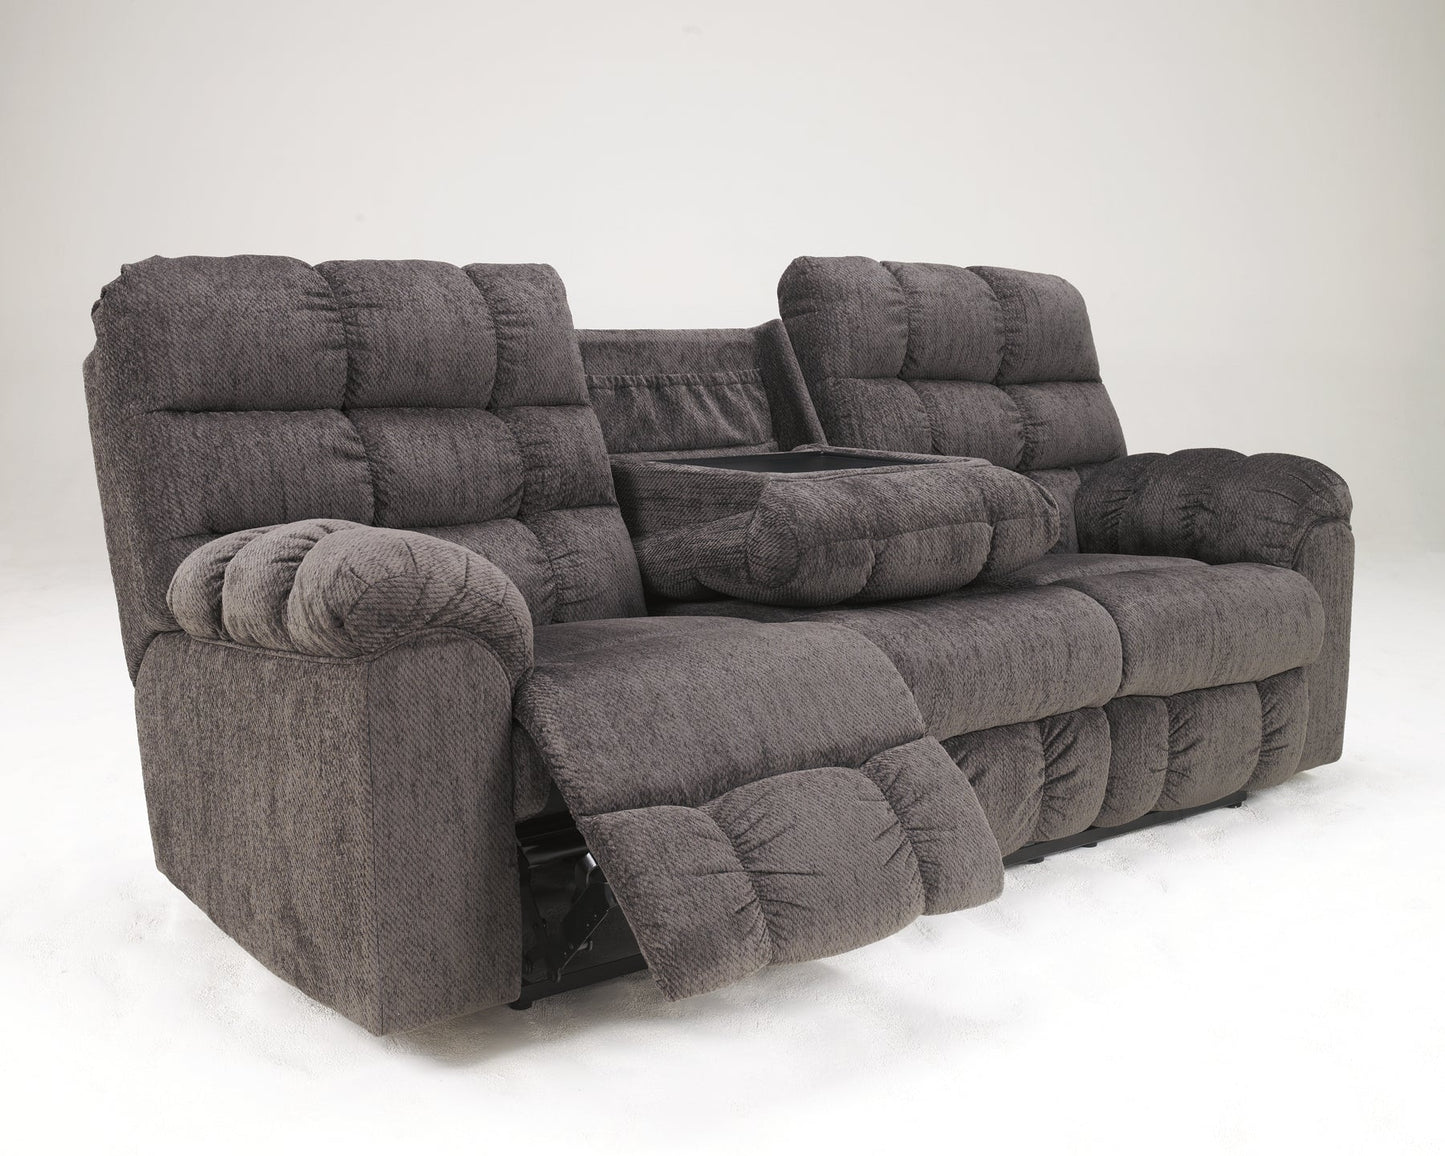 Acieona Sofa and Loveseat at Towne & Country Furniture (AL) furniture, home furniture, home decor, sofa, bedding